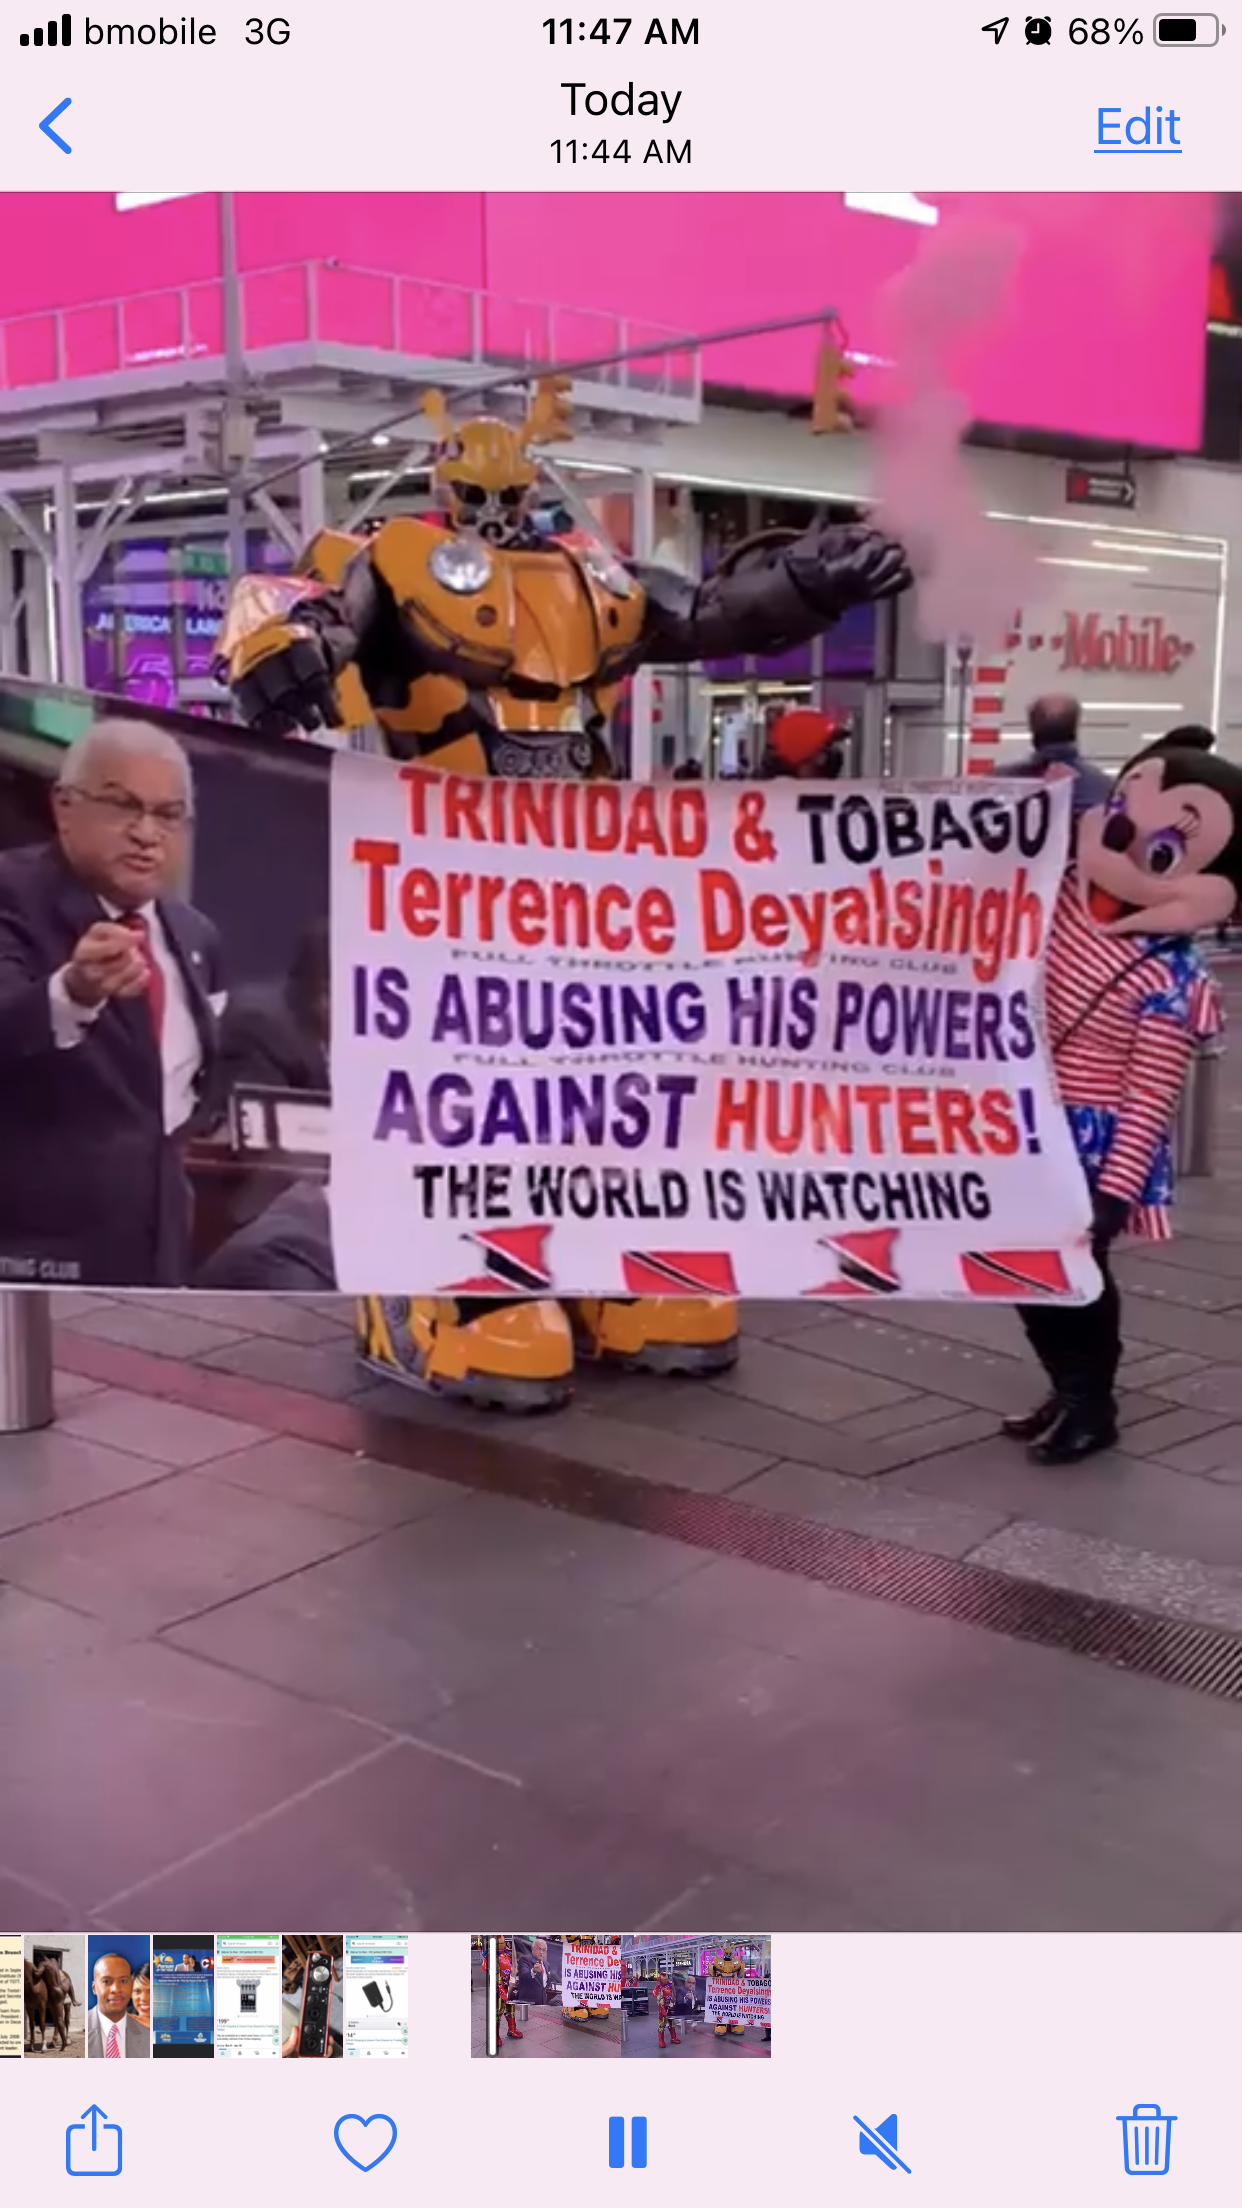 NYC based Trinis protest against Health Minister Deyalsingh in Time Square